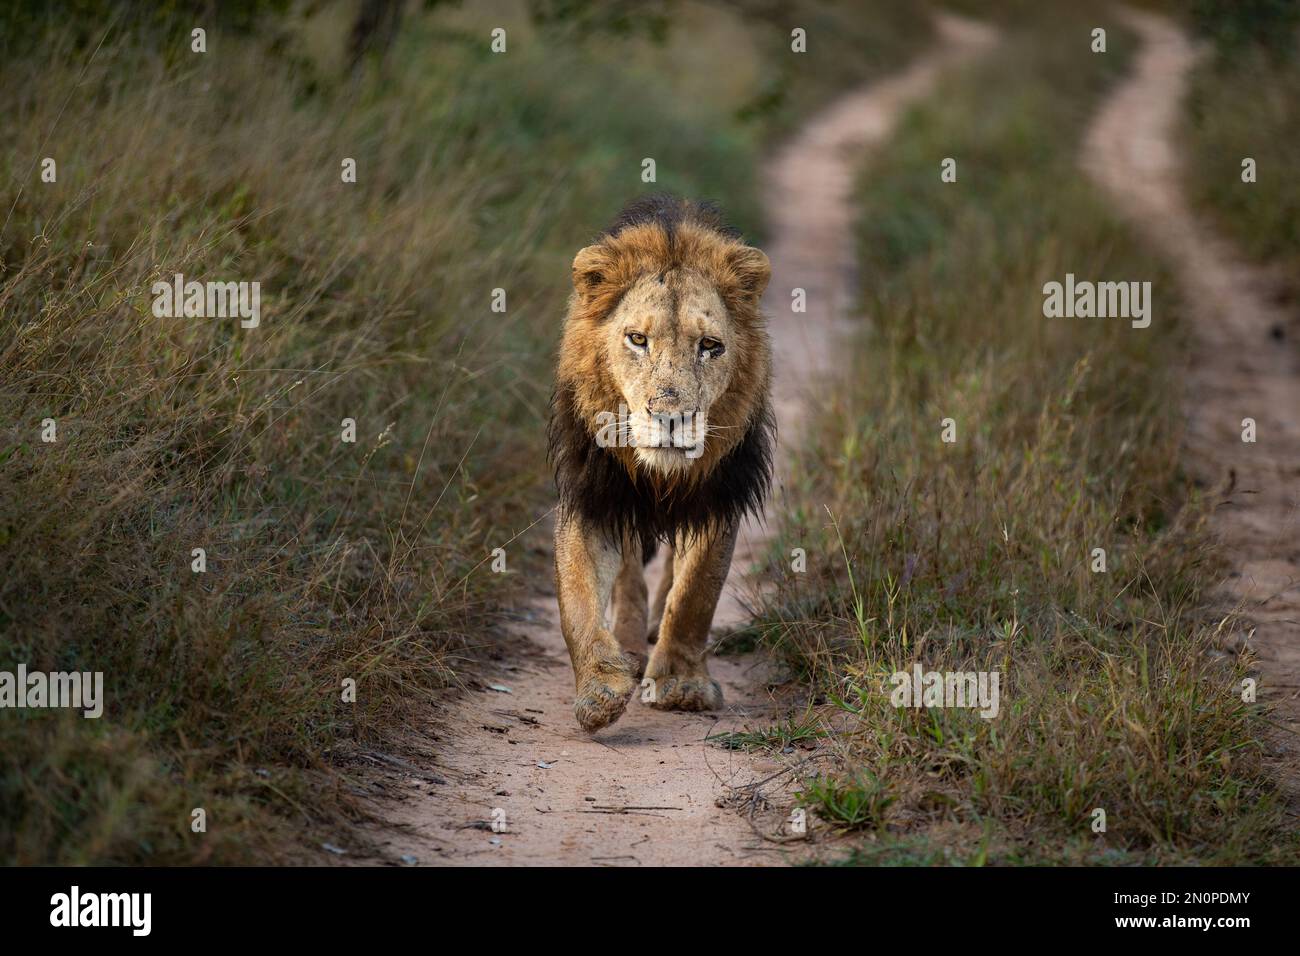 A male lion, Panthera leo, walks along a road, front on. Stock Photo